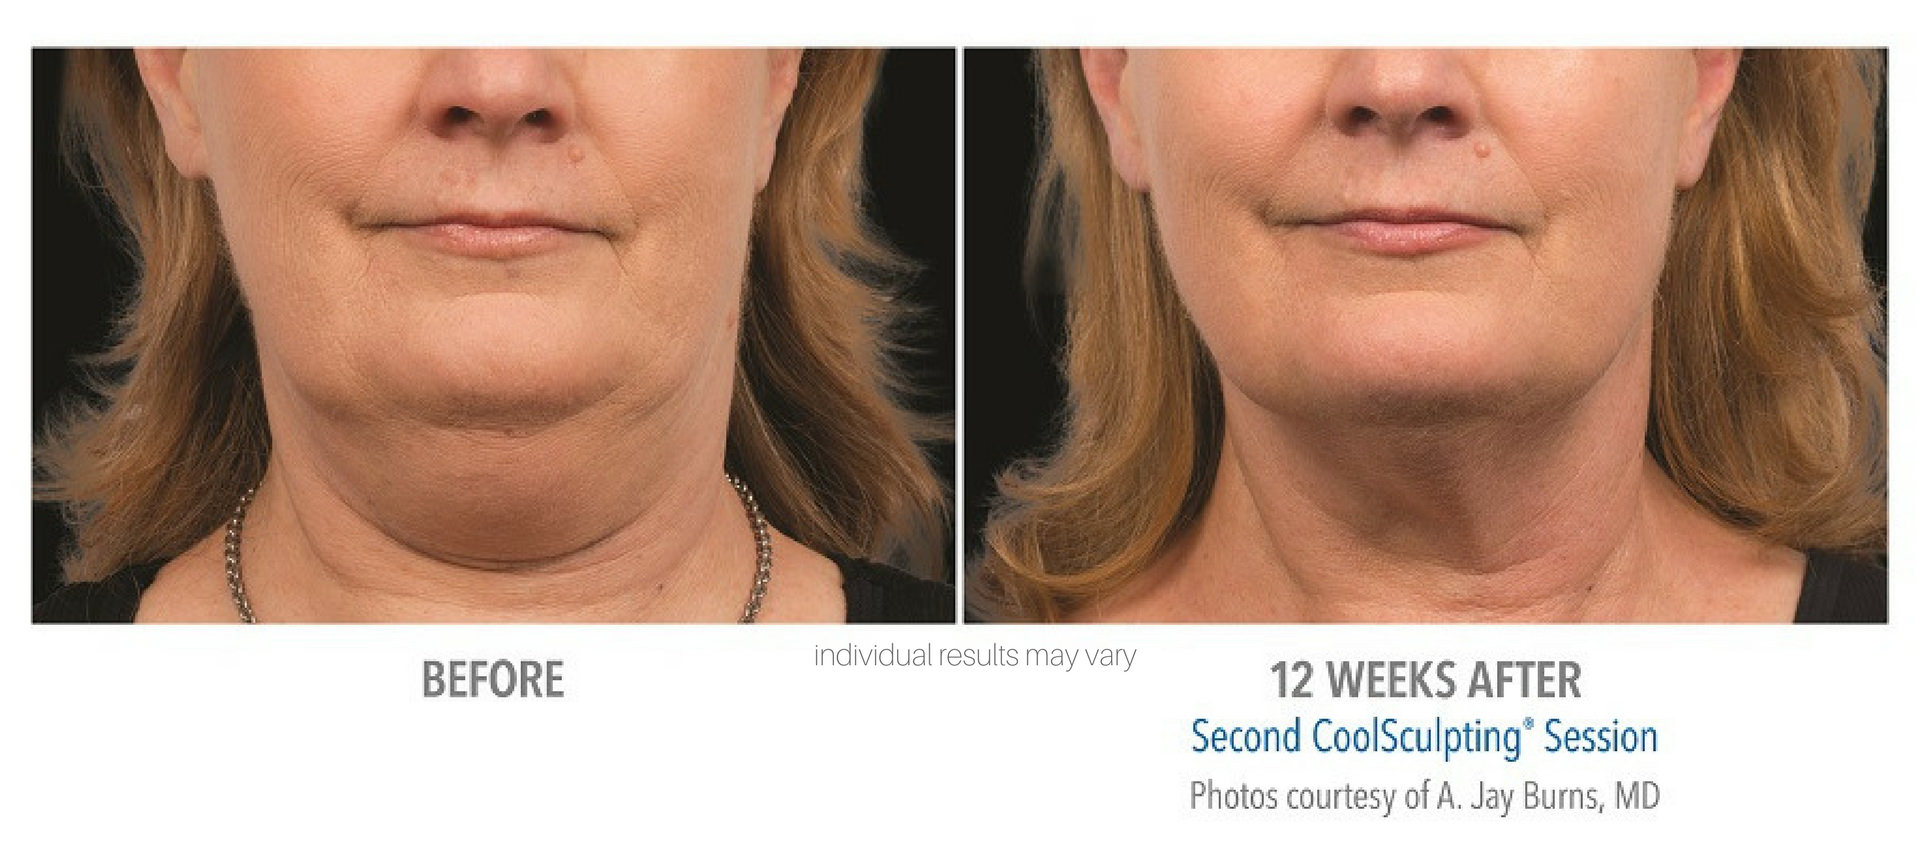 Woman's before and after results from CoolSculpting to chin area.